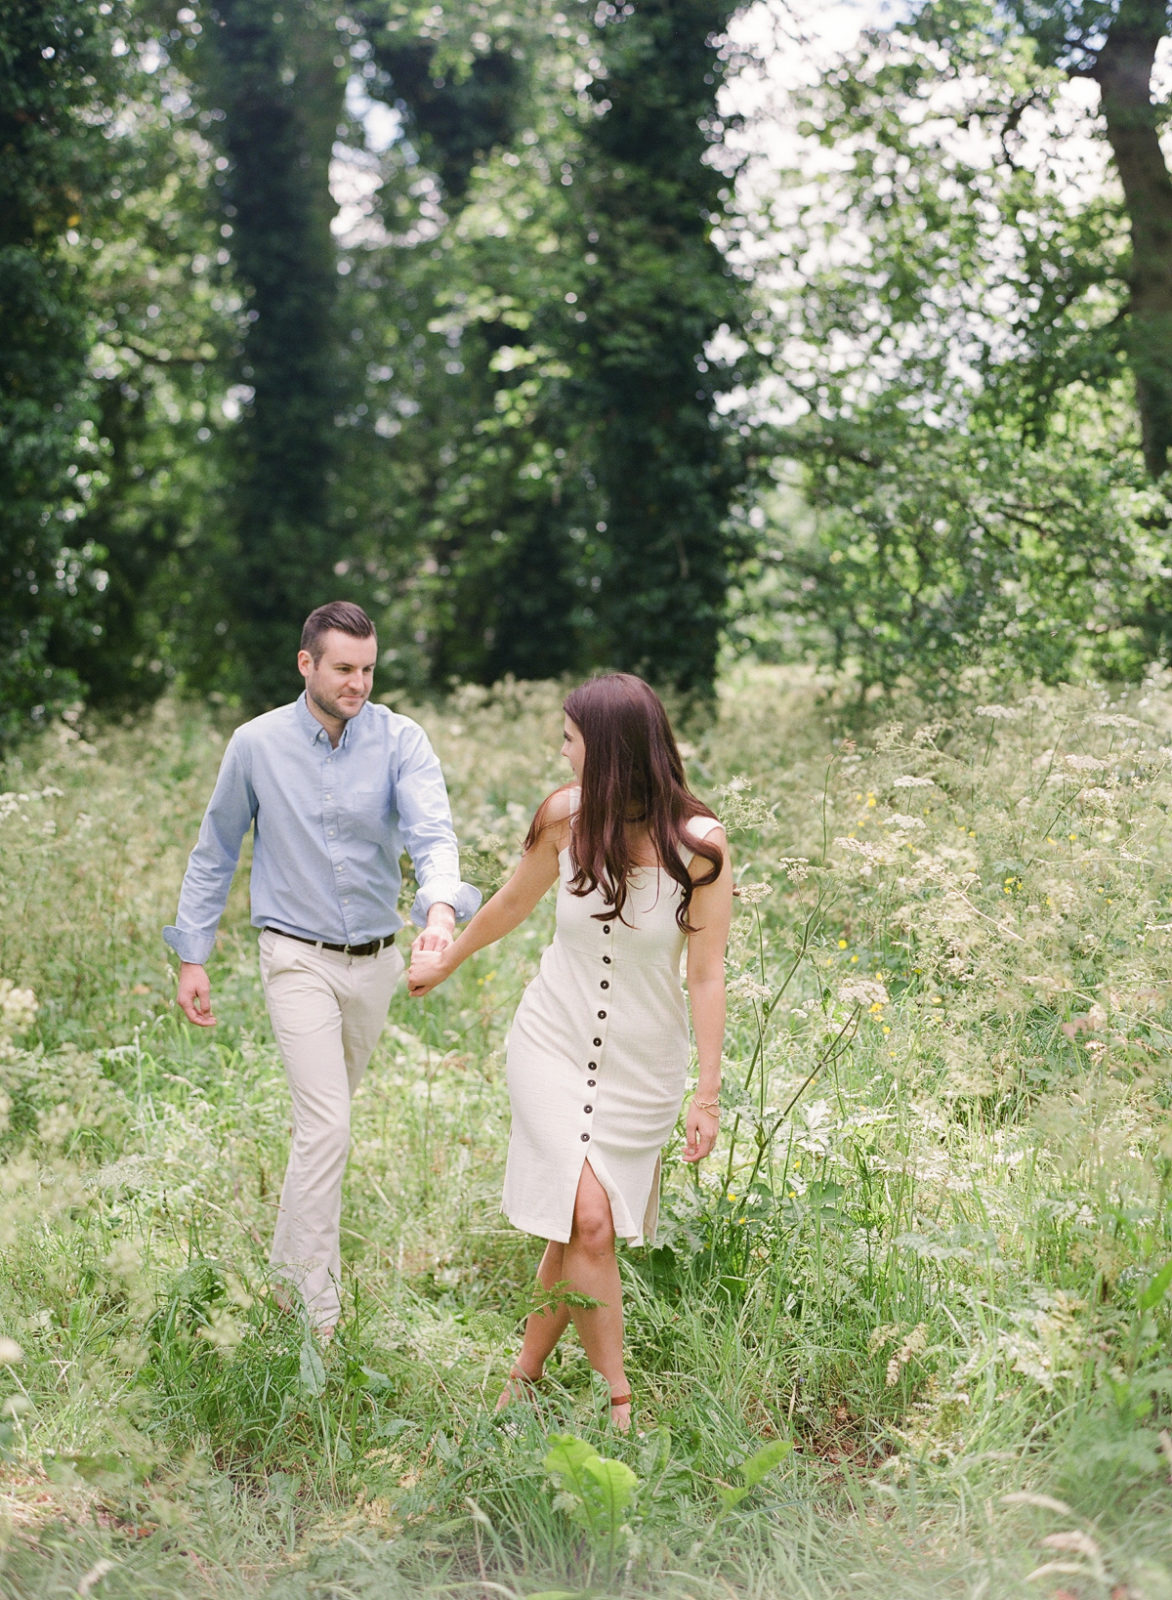 Ireland Film Photographer | Molly Carr Photography | Engagement Session at Mount Juliet Estate